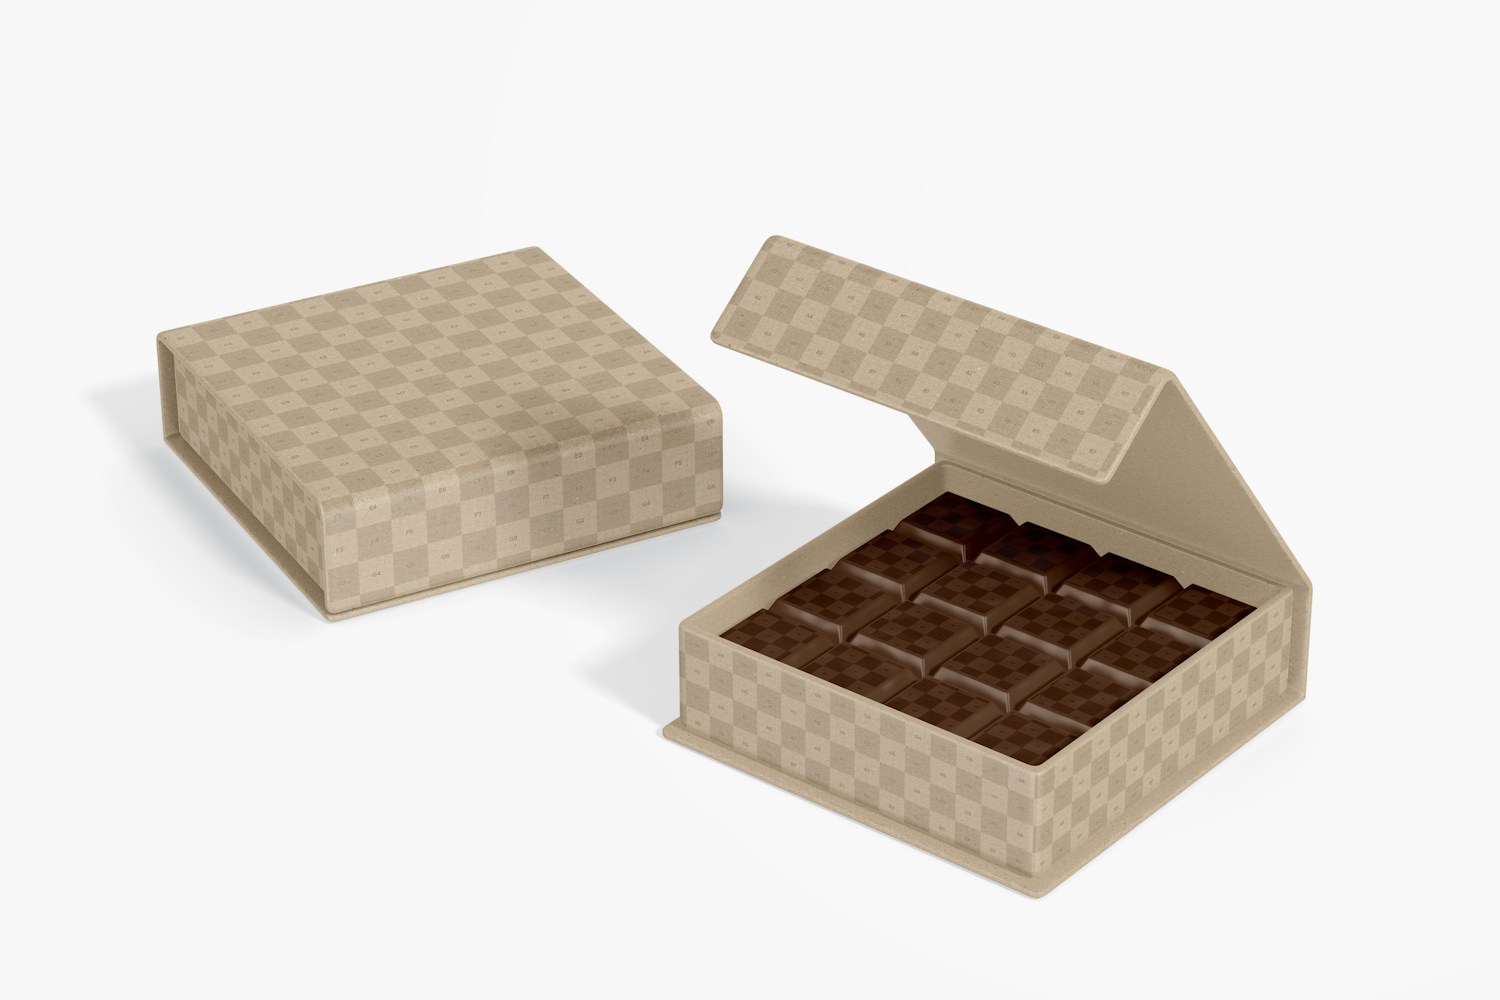 Square Chocolate Boxes Mockup, Opened and Closed